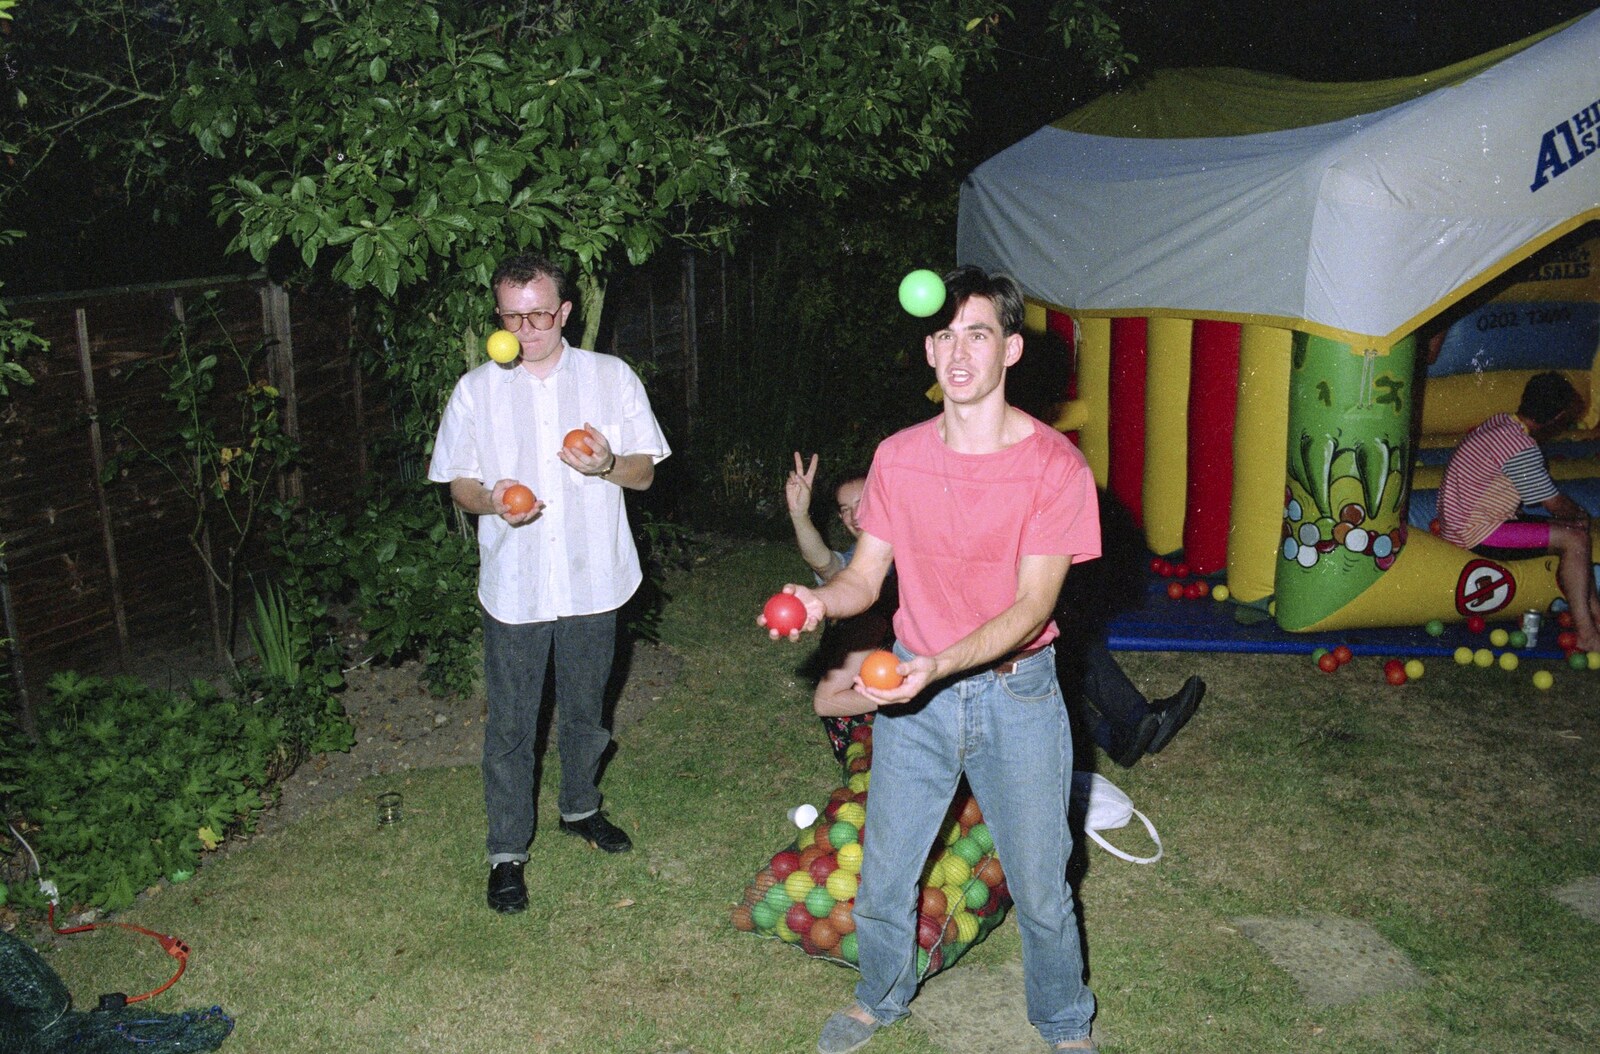 Chris and Phil's Party, Hordle, Hampshire - 6th September 1989: Hamish and Dave Richardson do some juggling